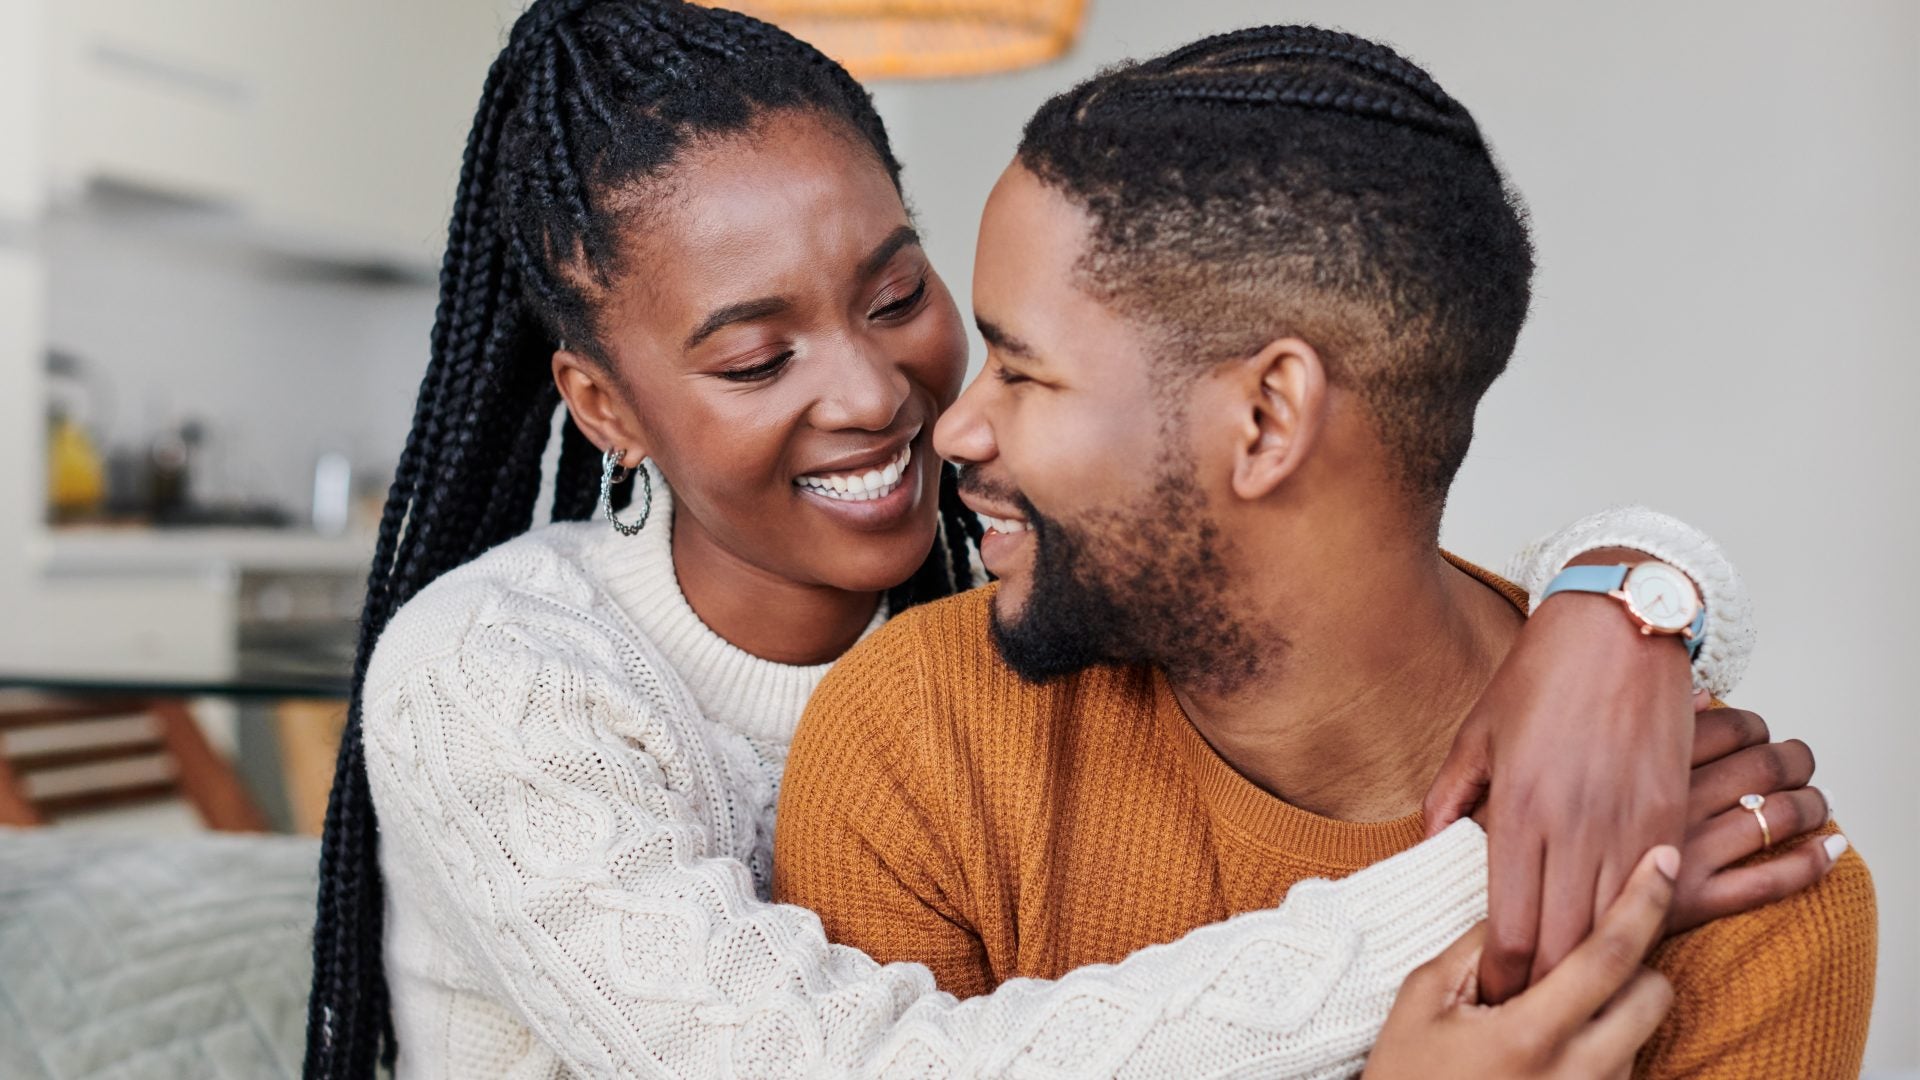 Sex Talk: If You're Married, Are You Getting Tested for STI/STDs? Here's Why You Should